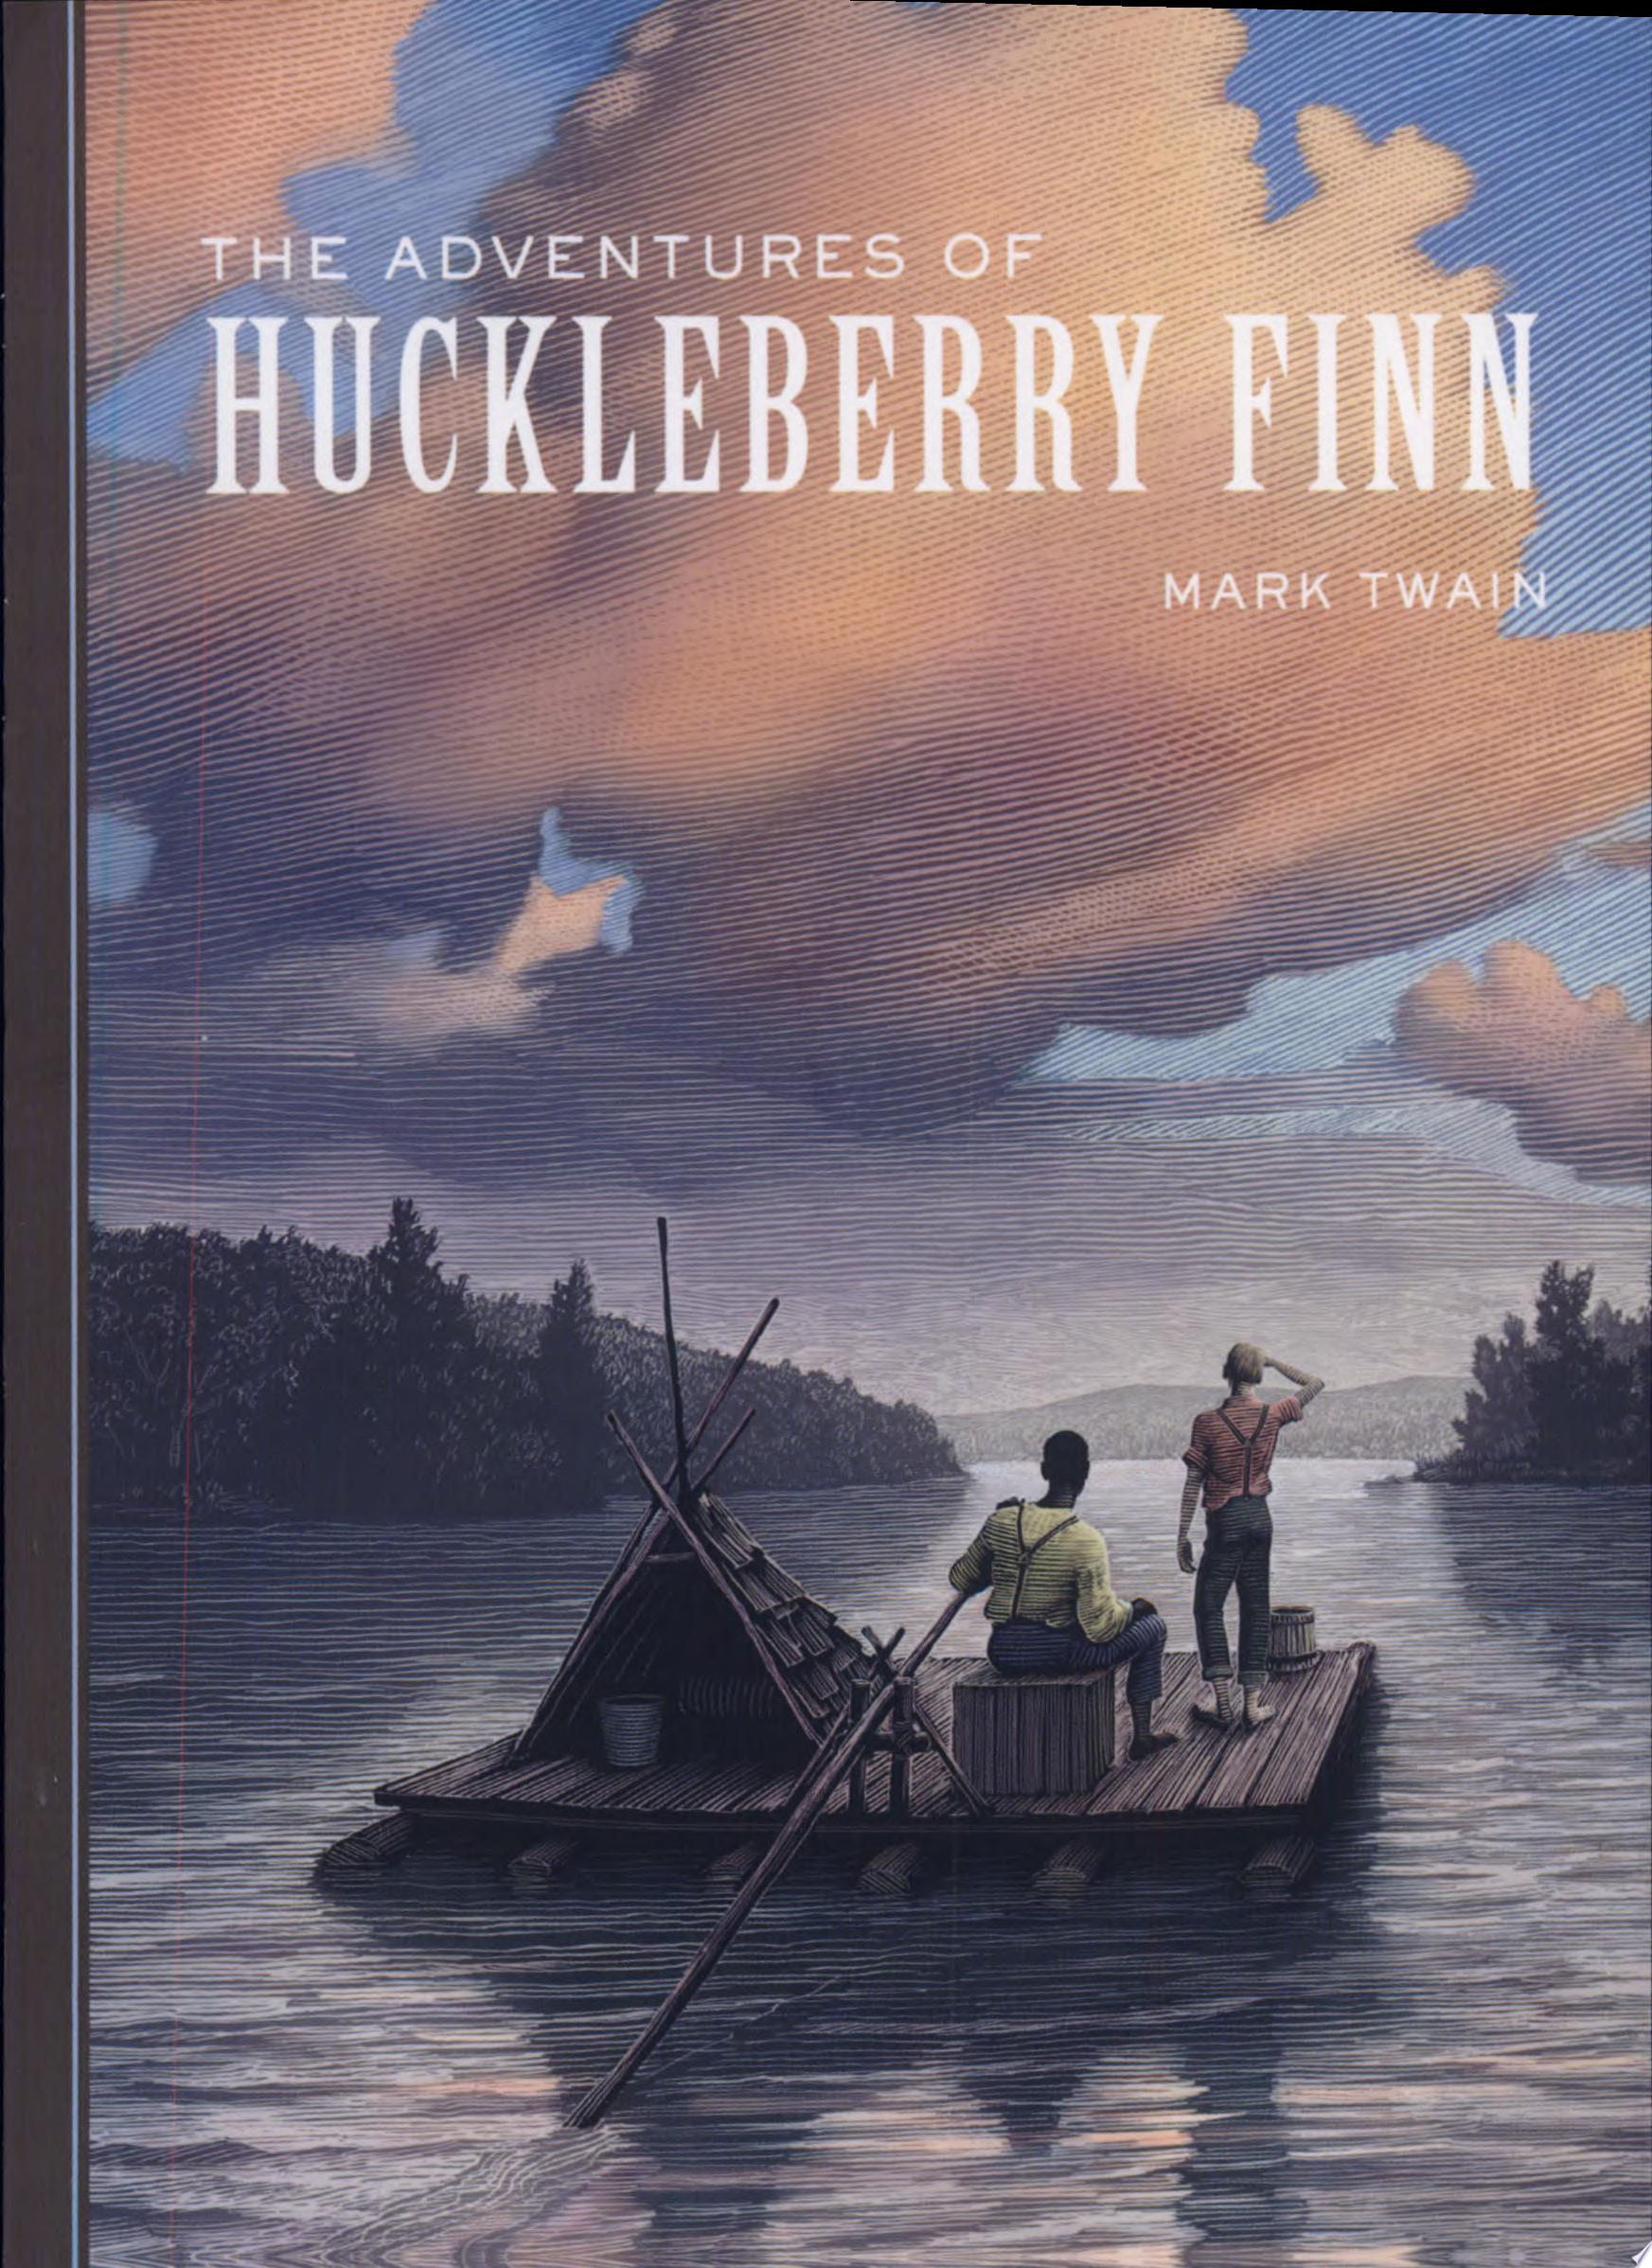 Image for "The Adventures of Huckleberry Finn"